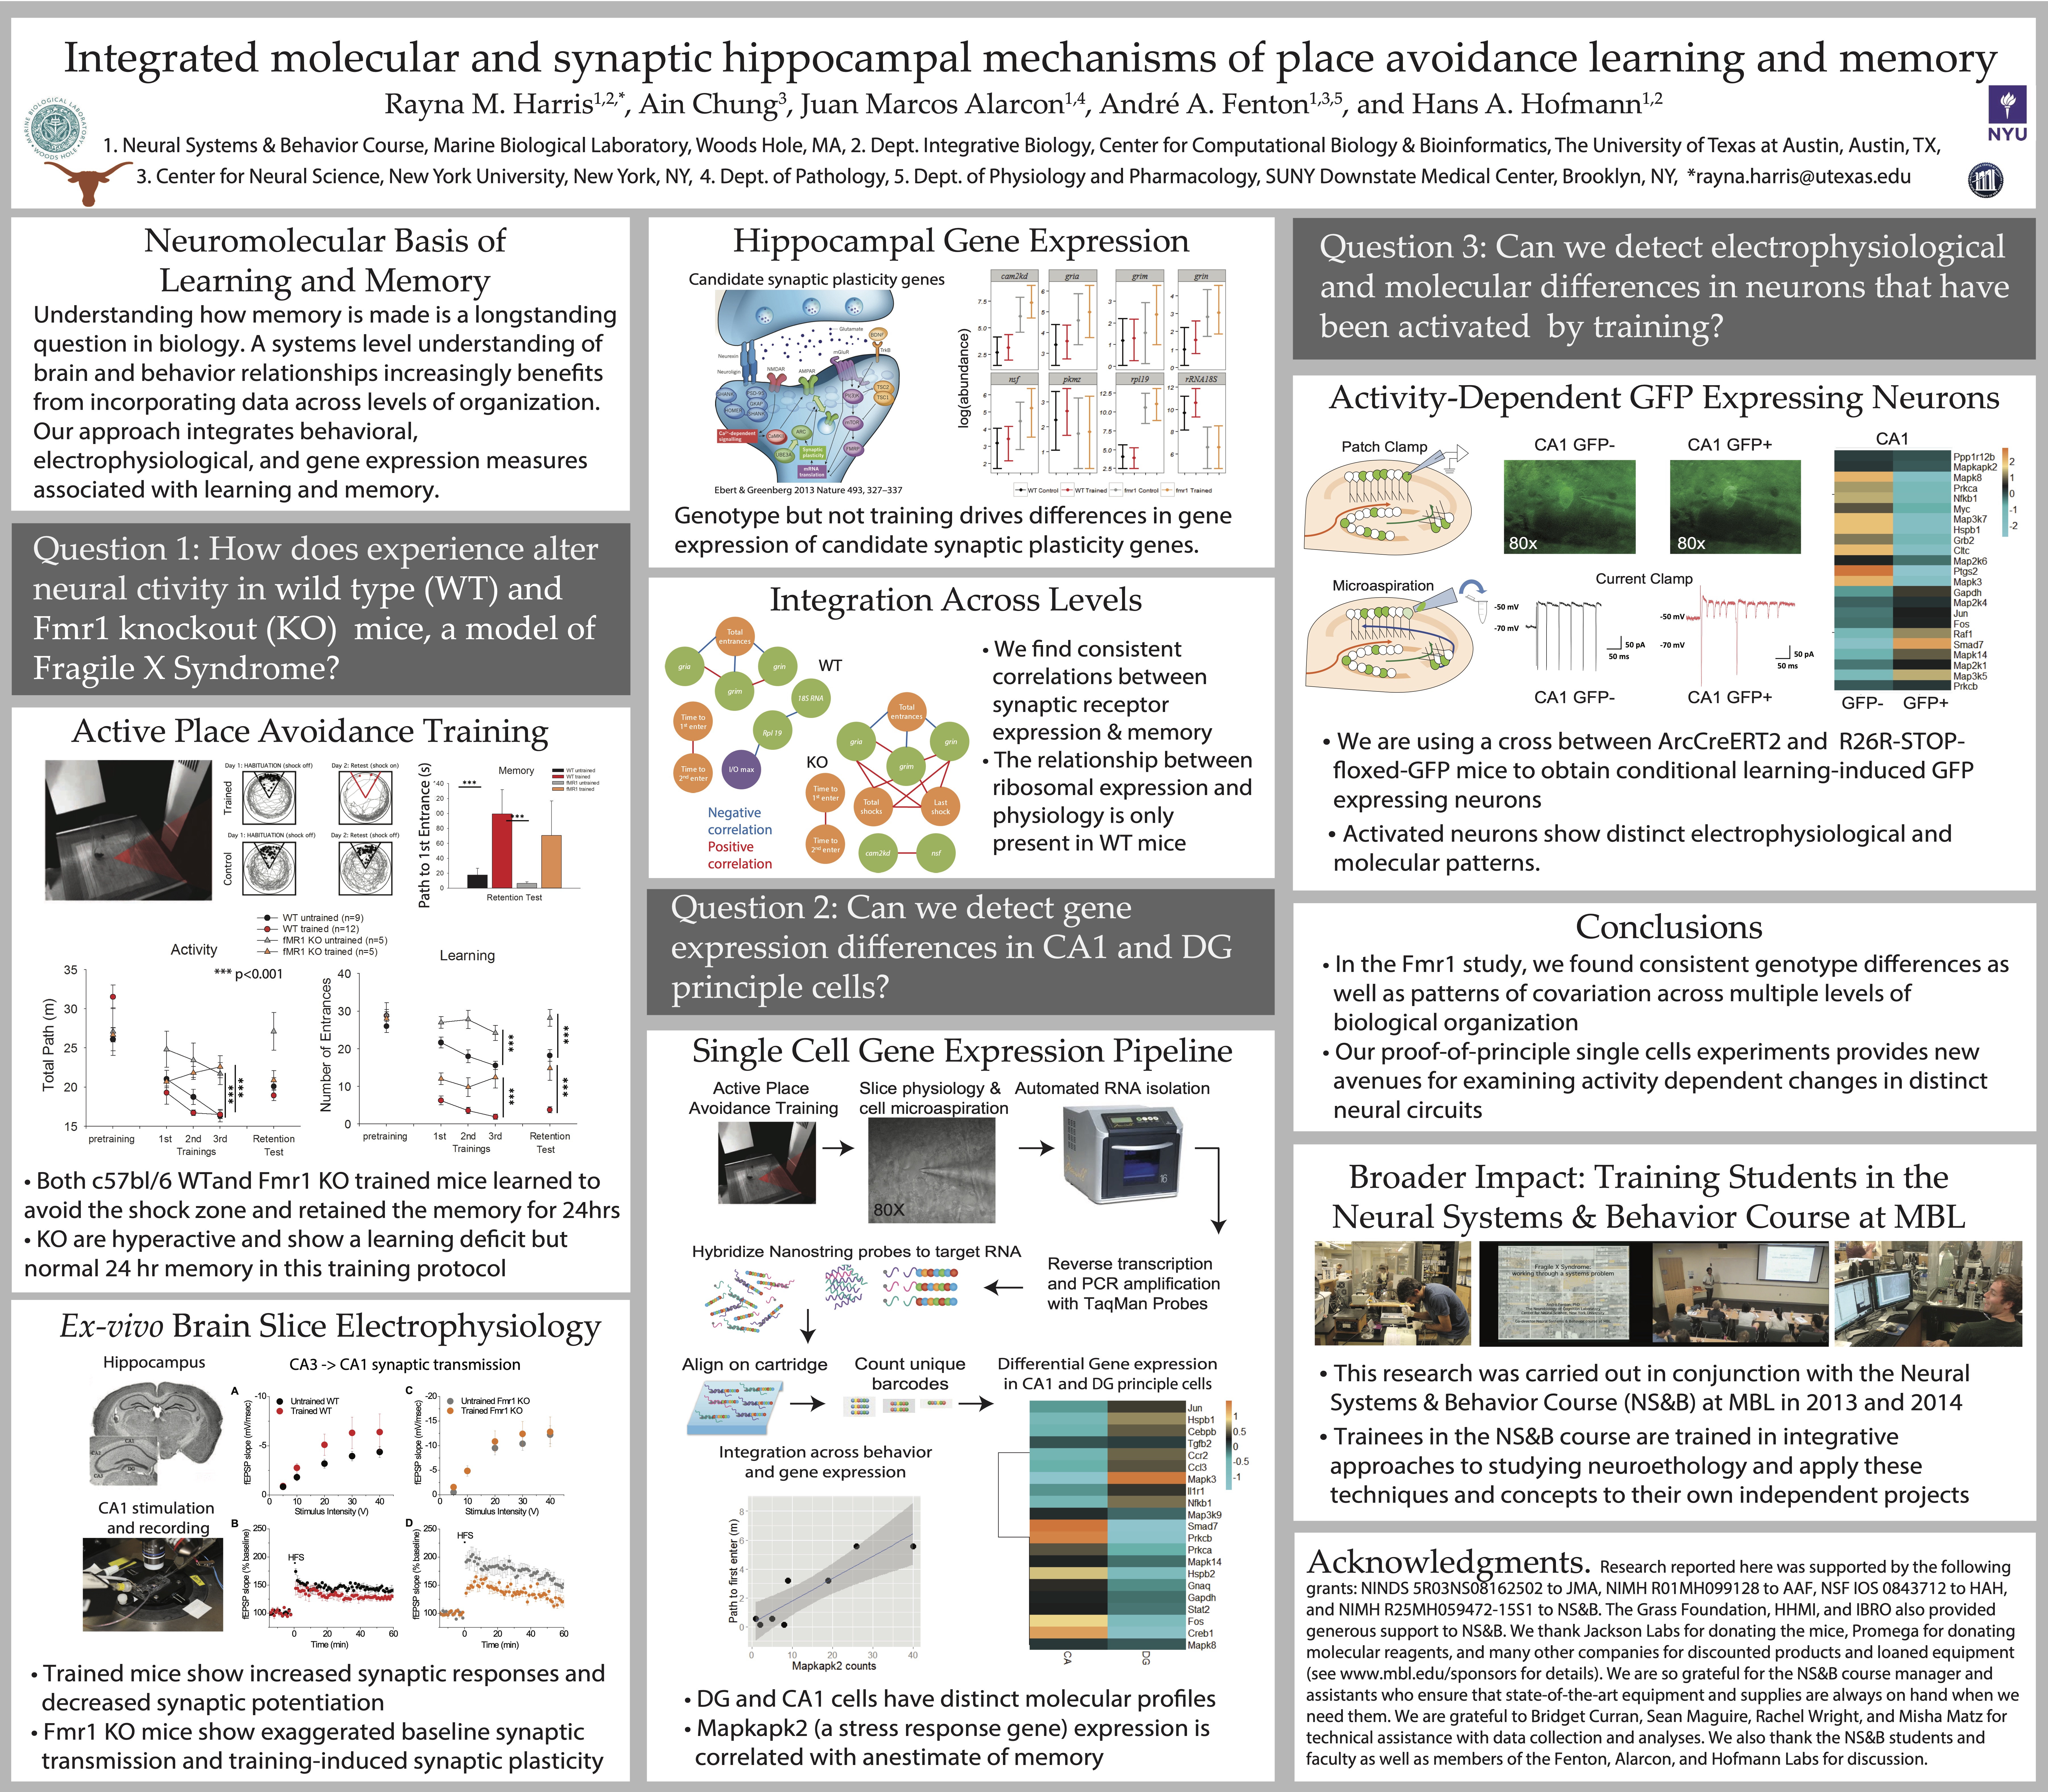 Poster describing the neural and molecular mechanisms associated with learning.